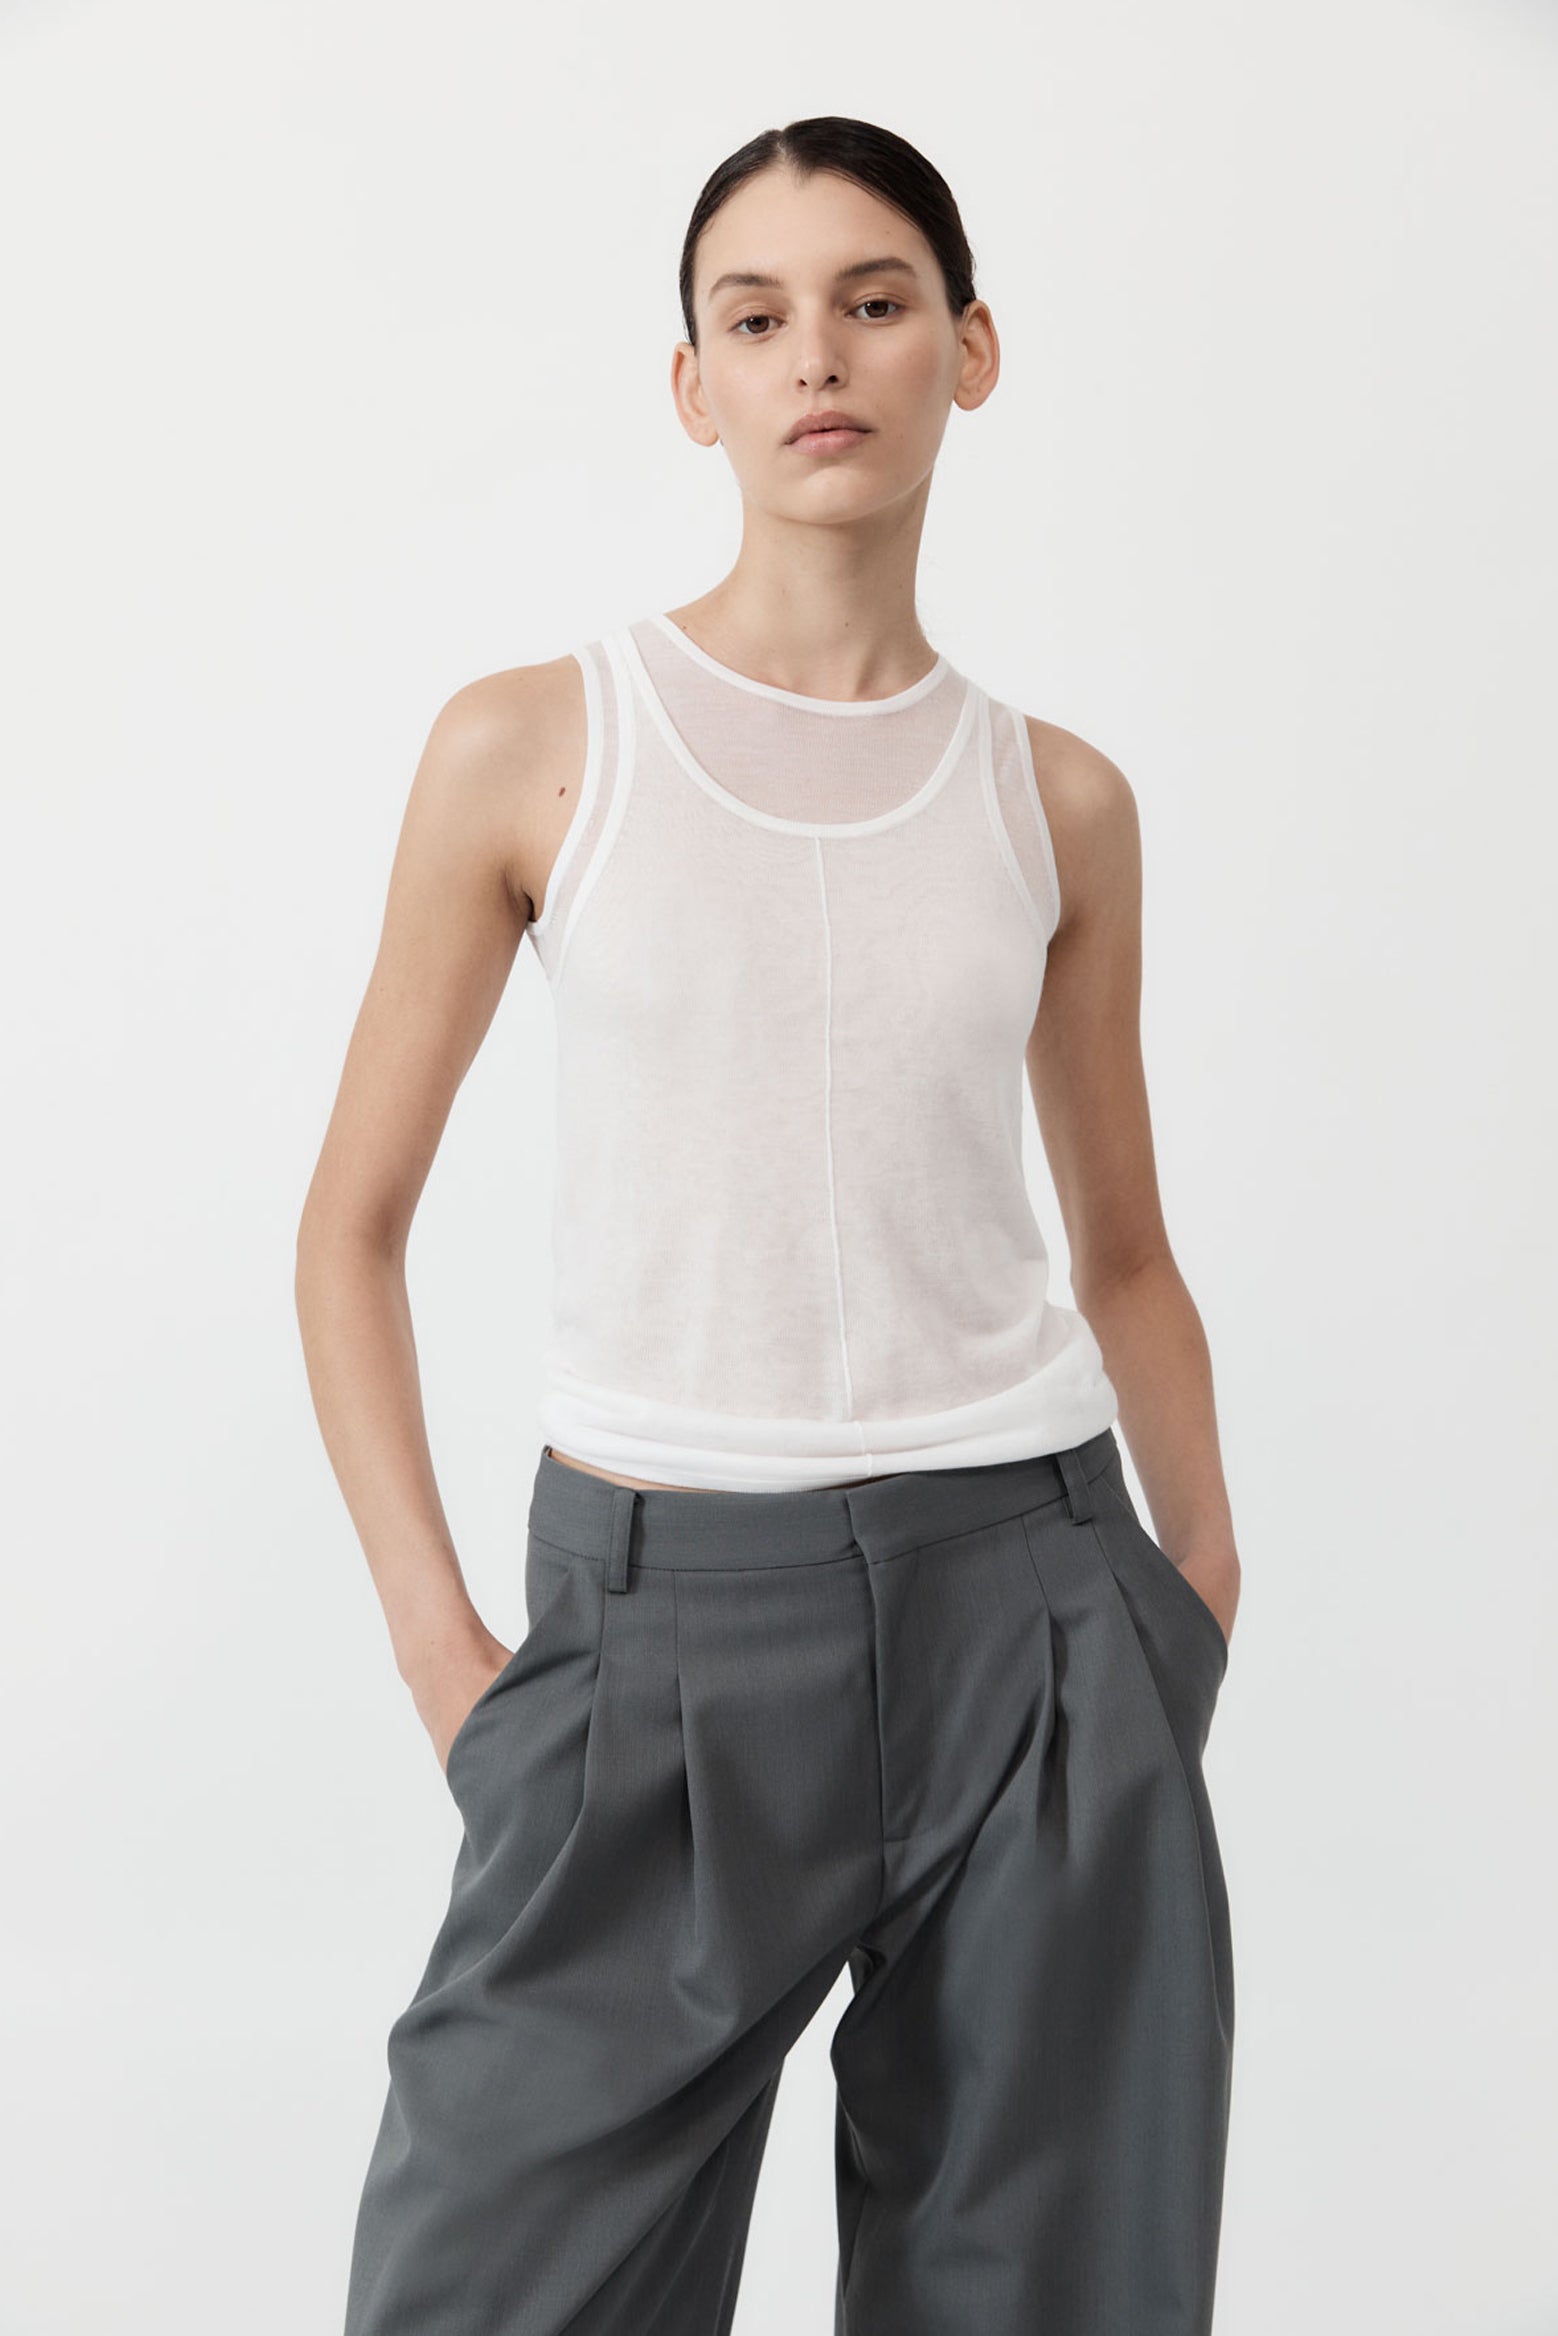 St Agni Semi Sheer Double Layered Tank in White available at The New Trend Australia.